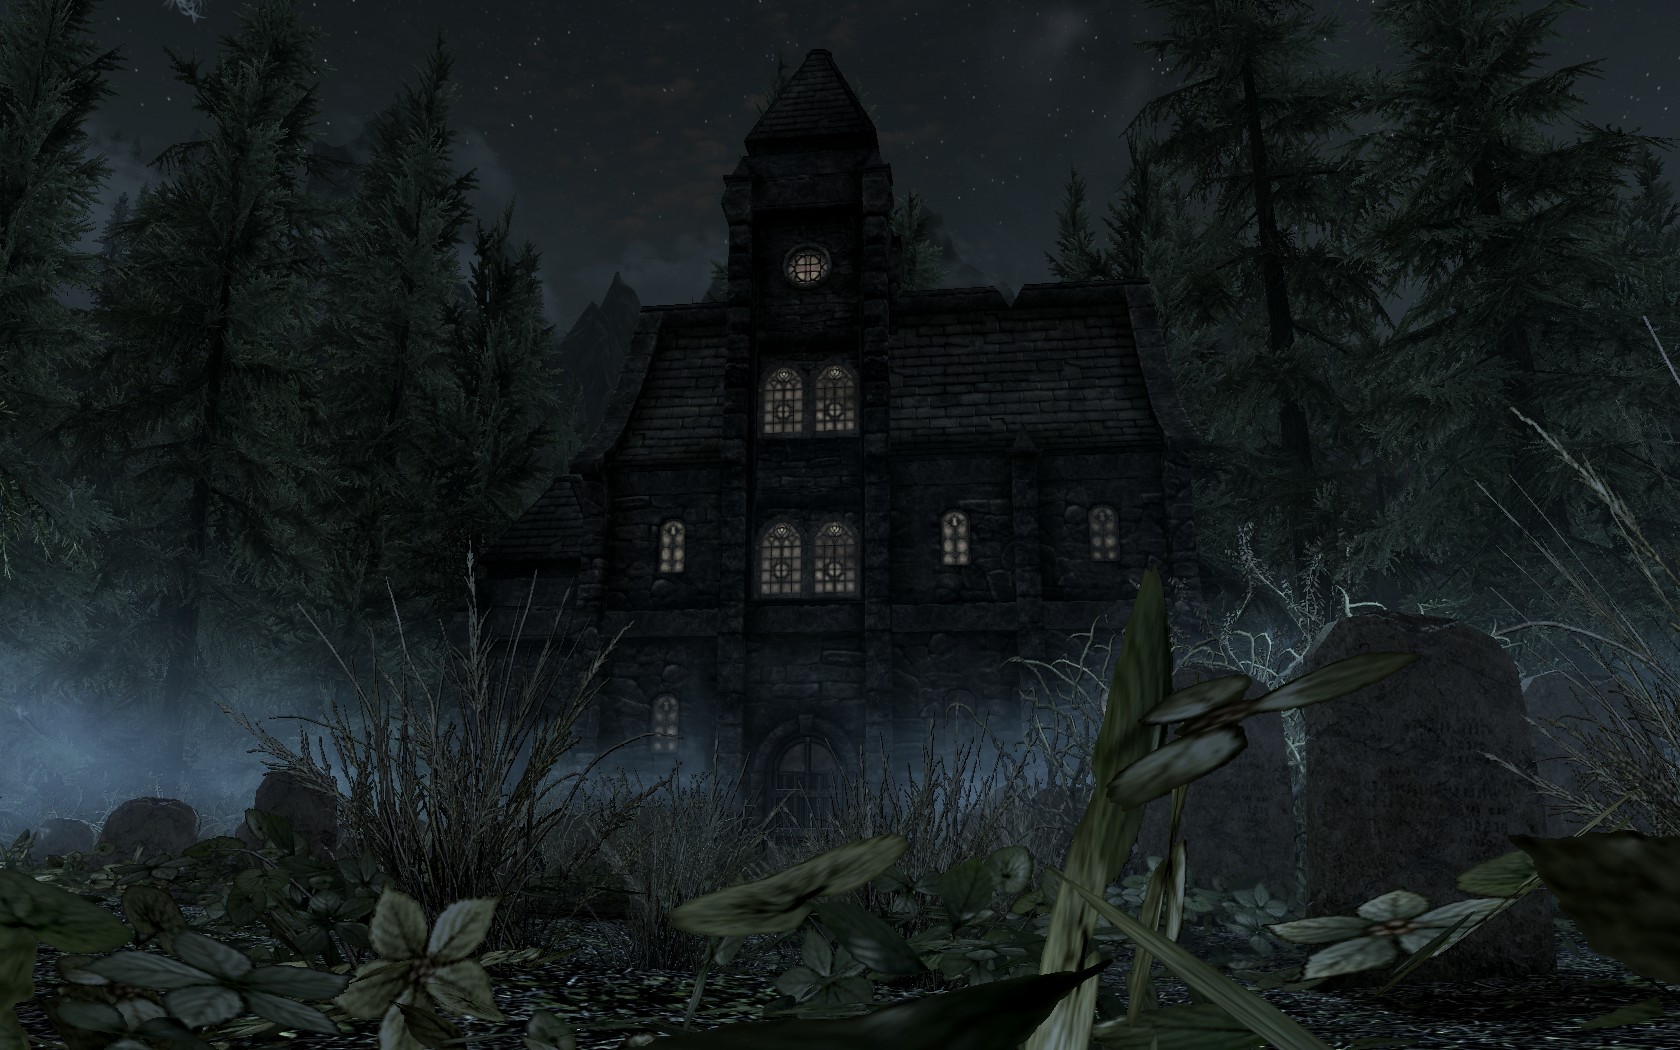 the mystery of thorn manor